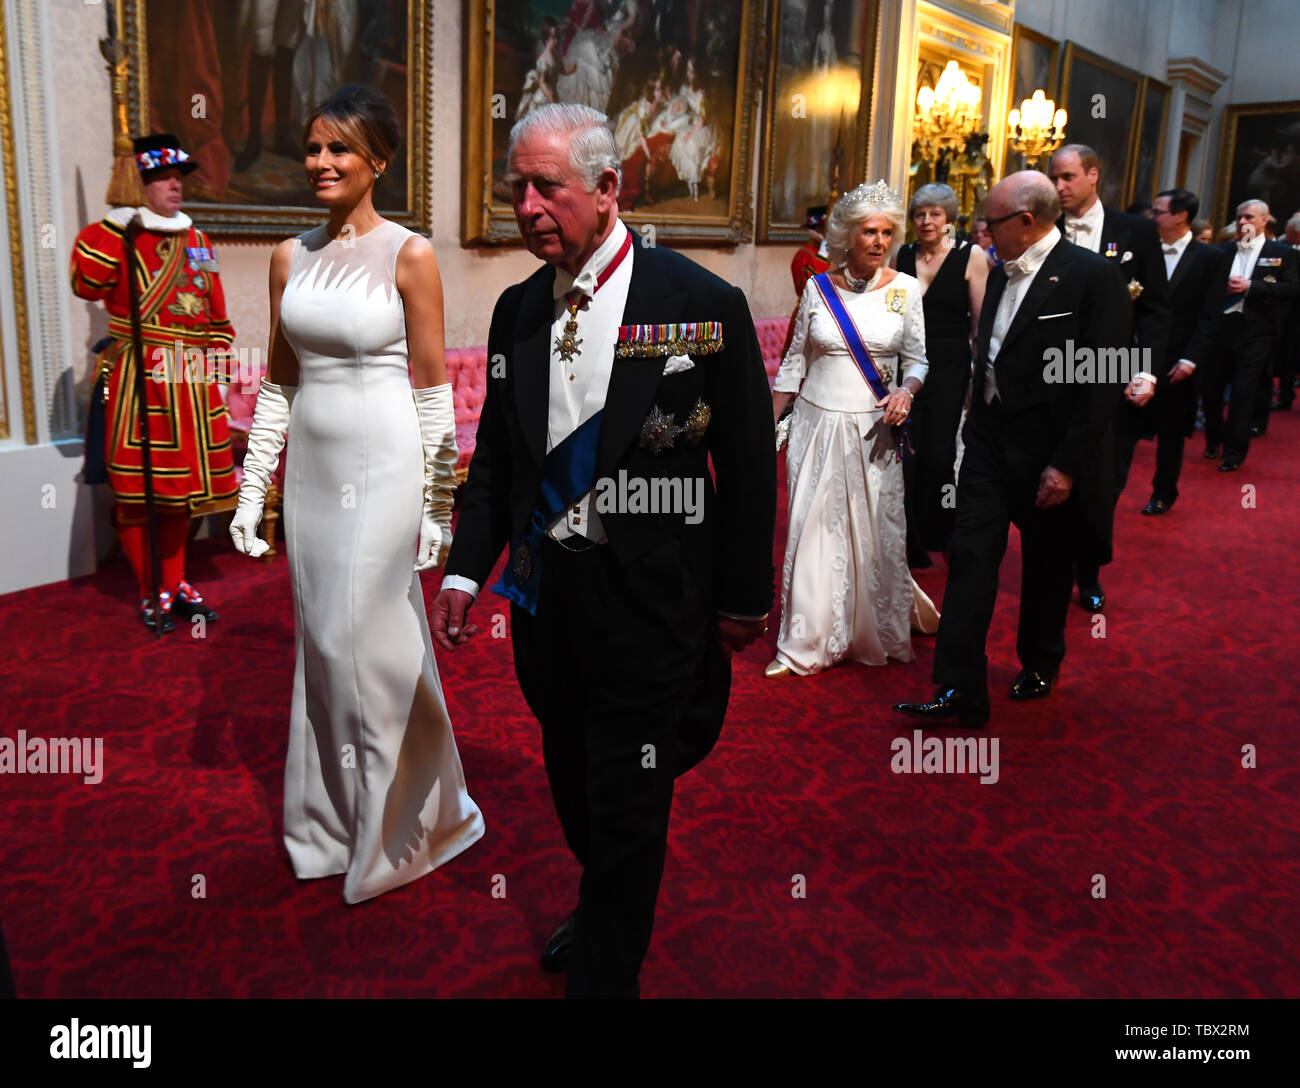 Melania Trump and the Prince of Wales arrive through the East Gallery during the State Banquet at Buckingham Palace, London, on day one of the US President's three day state visit to the UK. Stock Photo